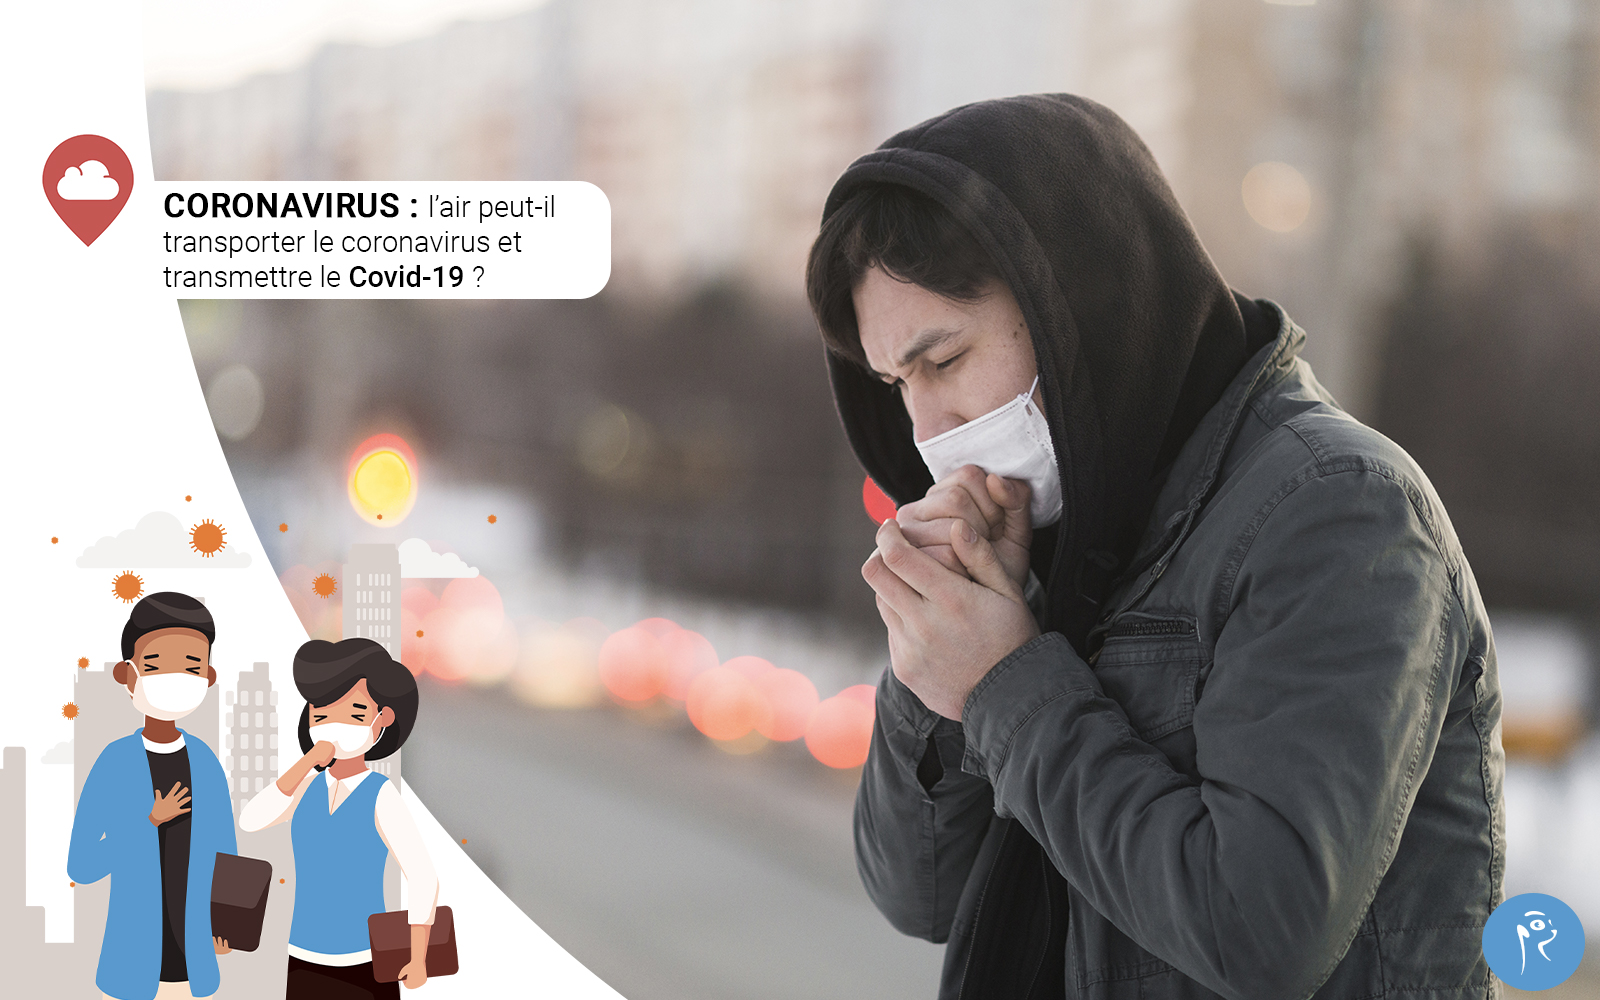 Can air carry the coronavirus and transmit Covid-19?